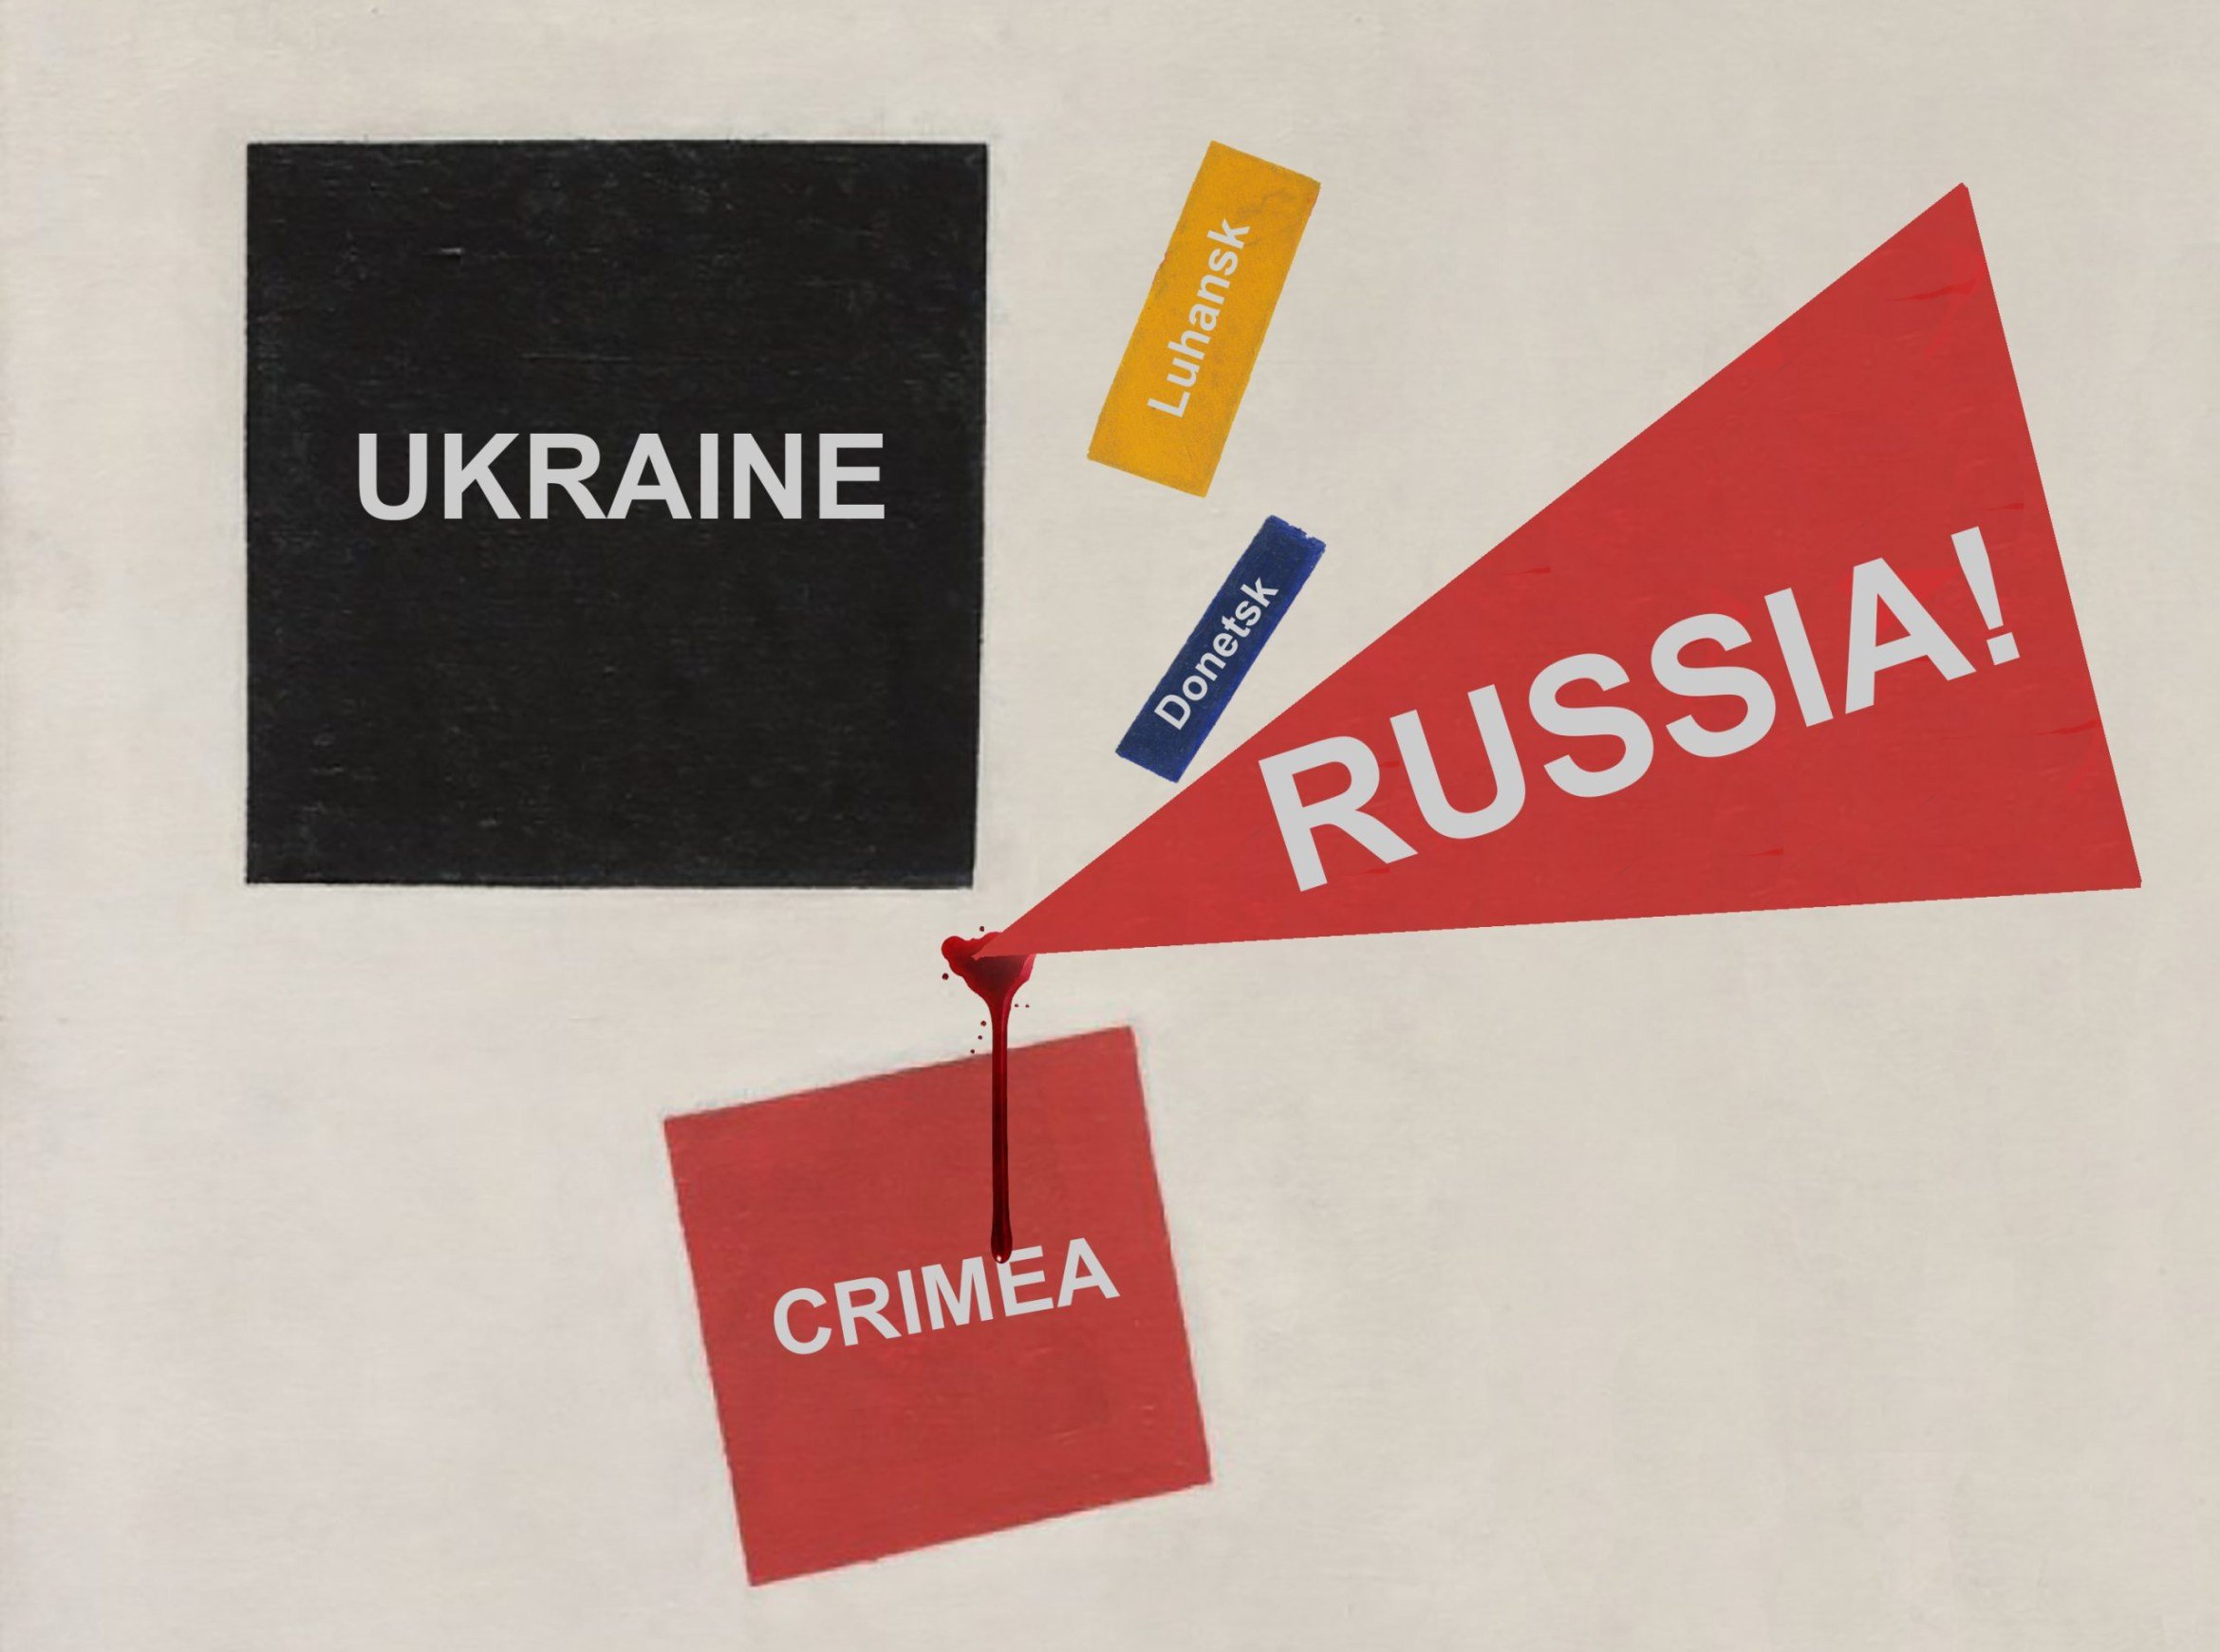 "Why We Need a Post-Colonial Lens to Look at Ukraine and Russia"